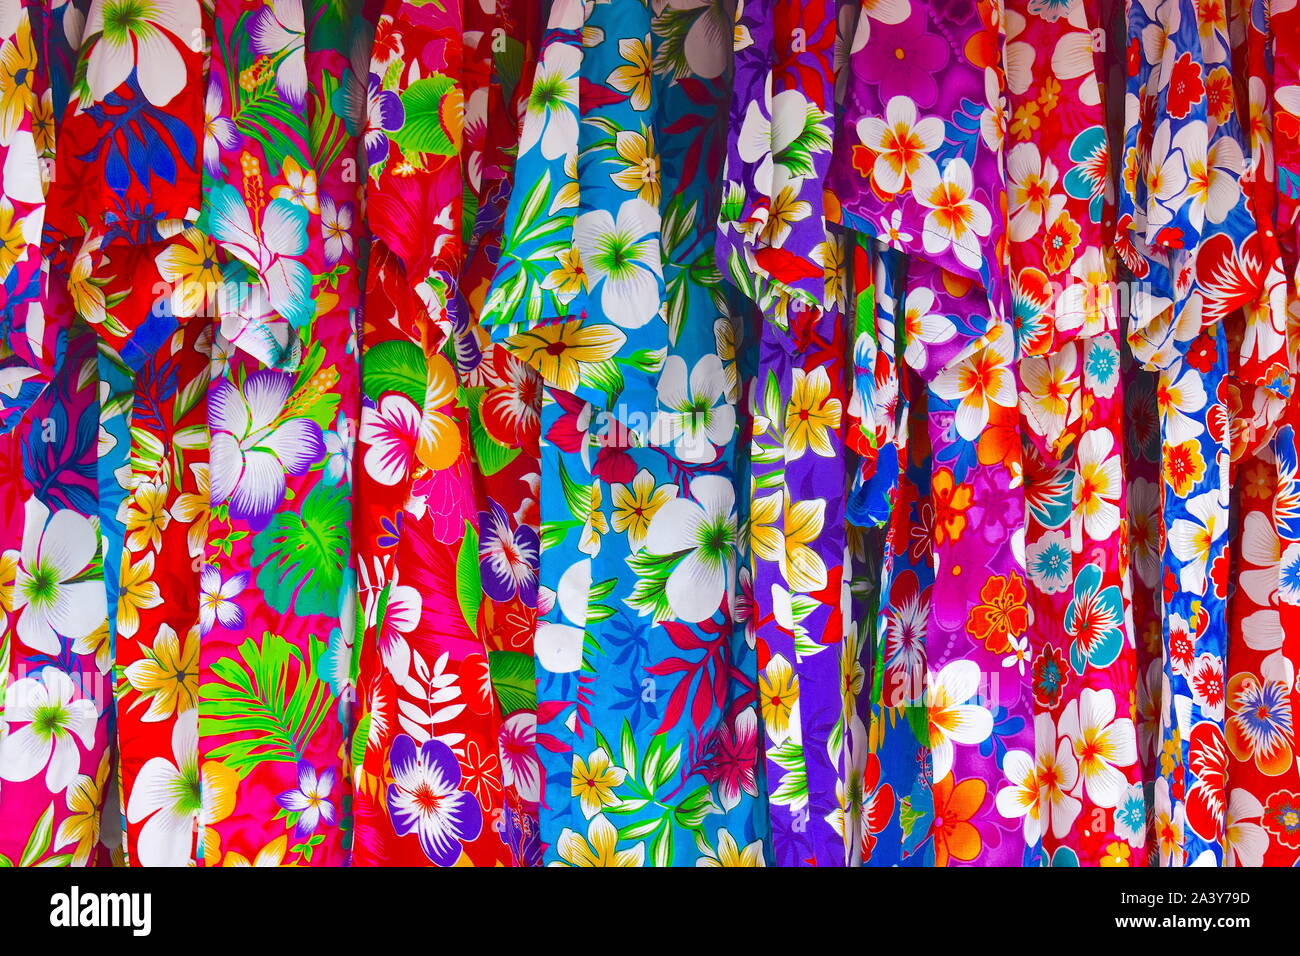 Hawaiian flower print shirts on sale. Different colours and sizes for the entire family available on the local market stalls. South of France, Europe Stock Photo